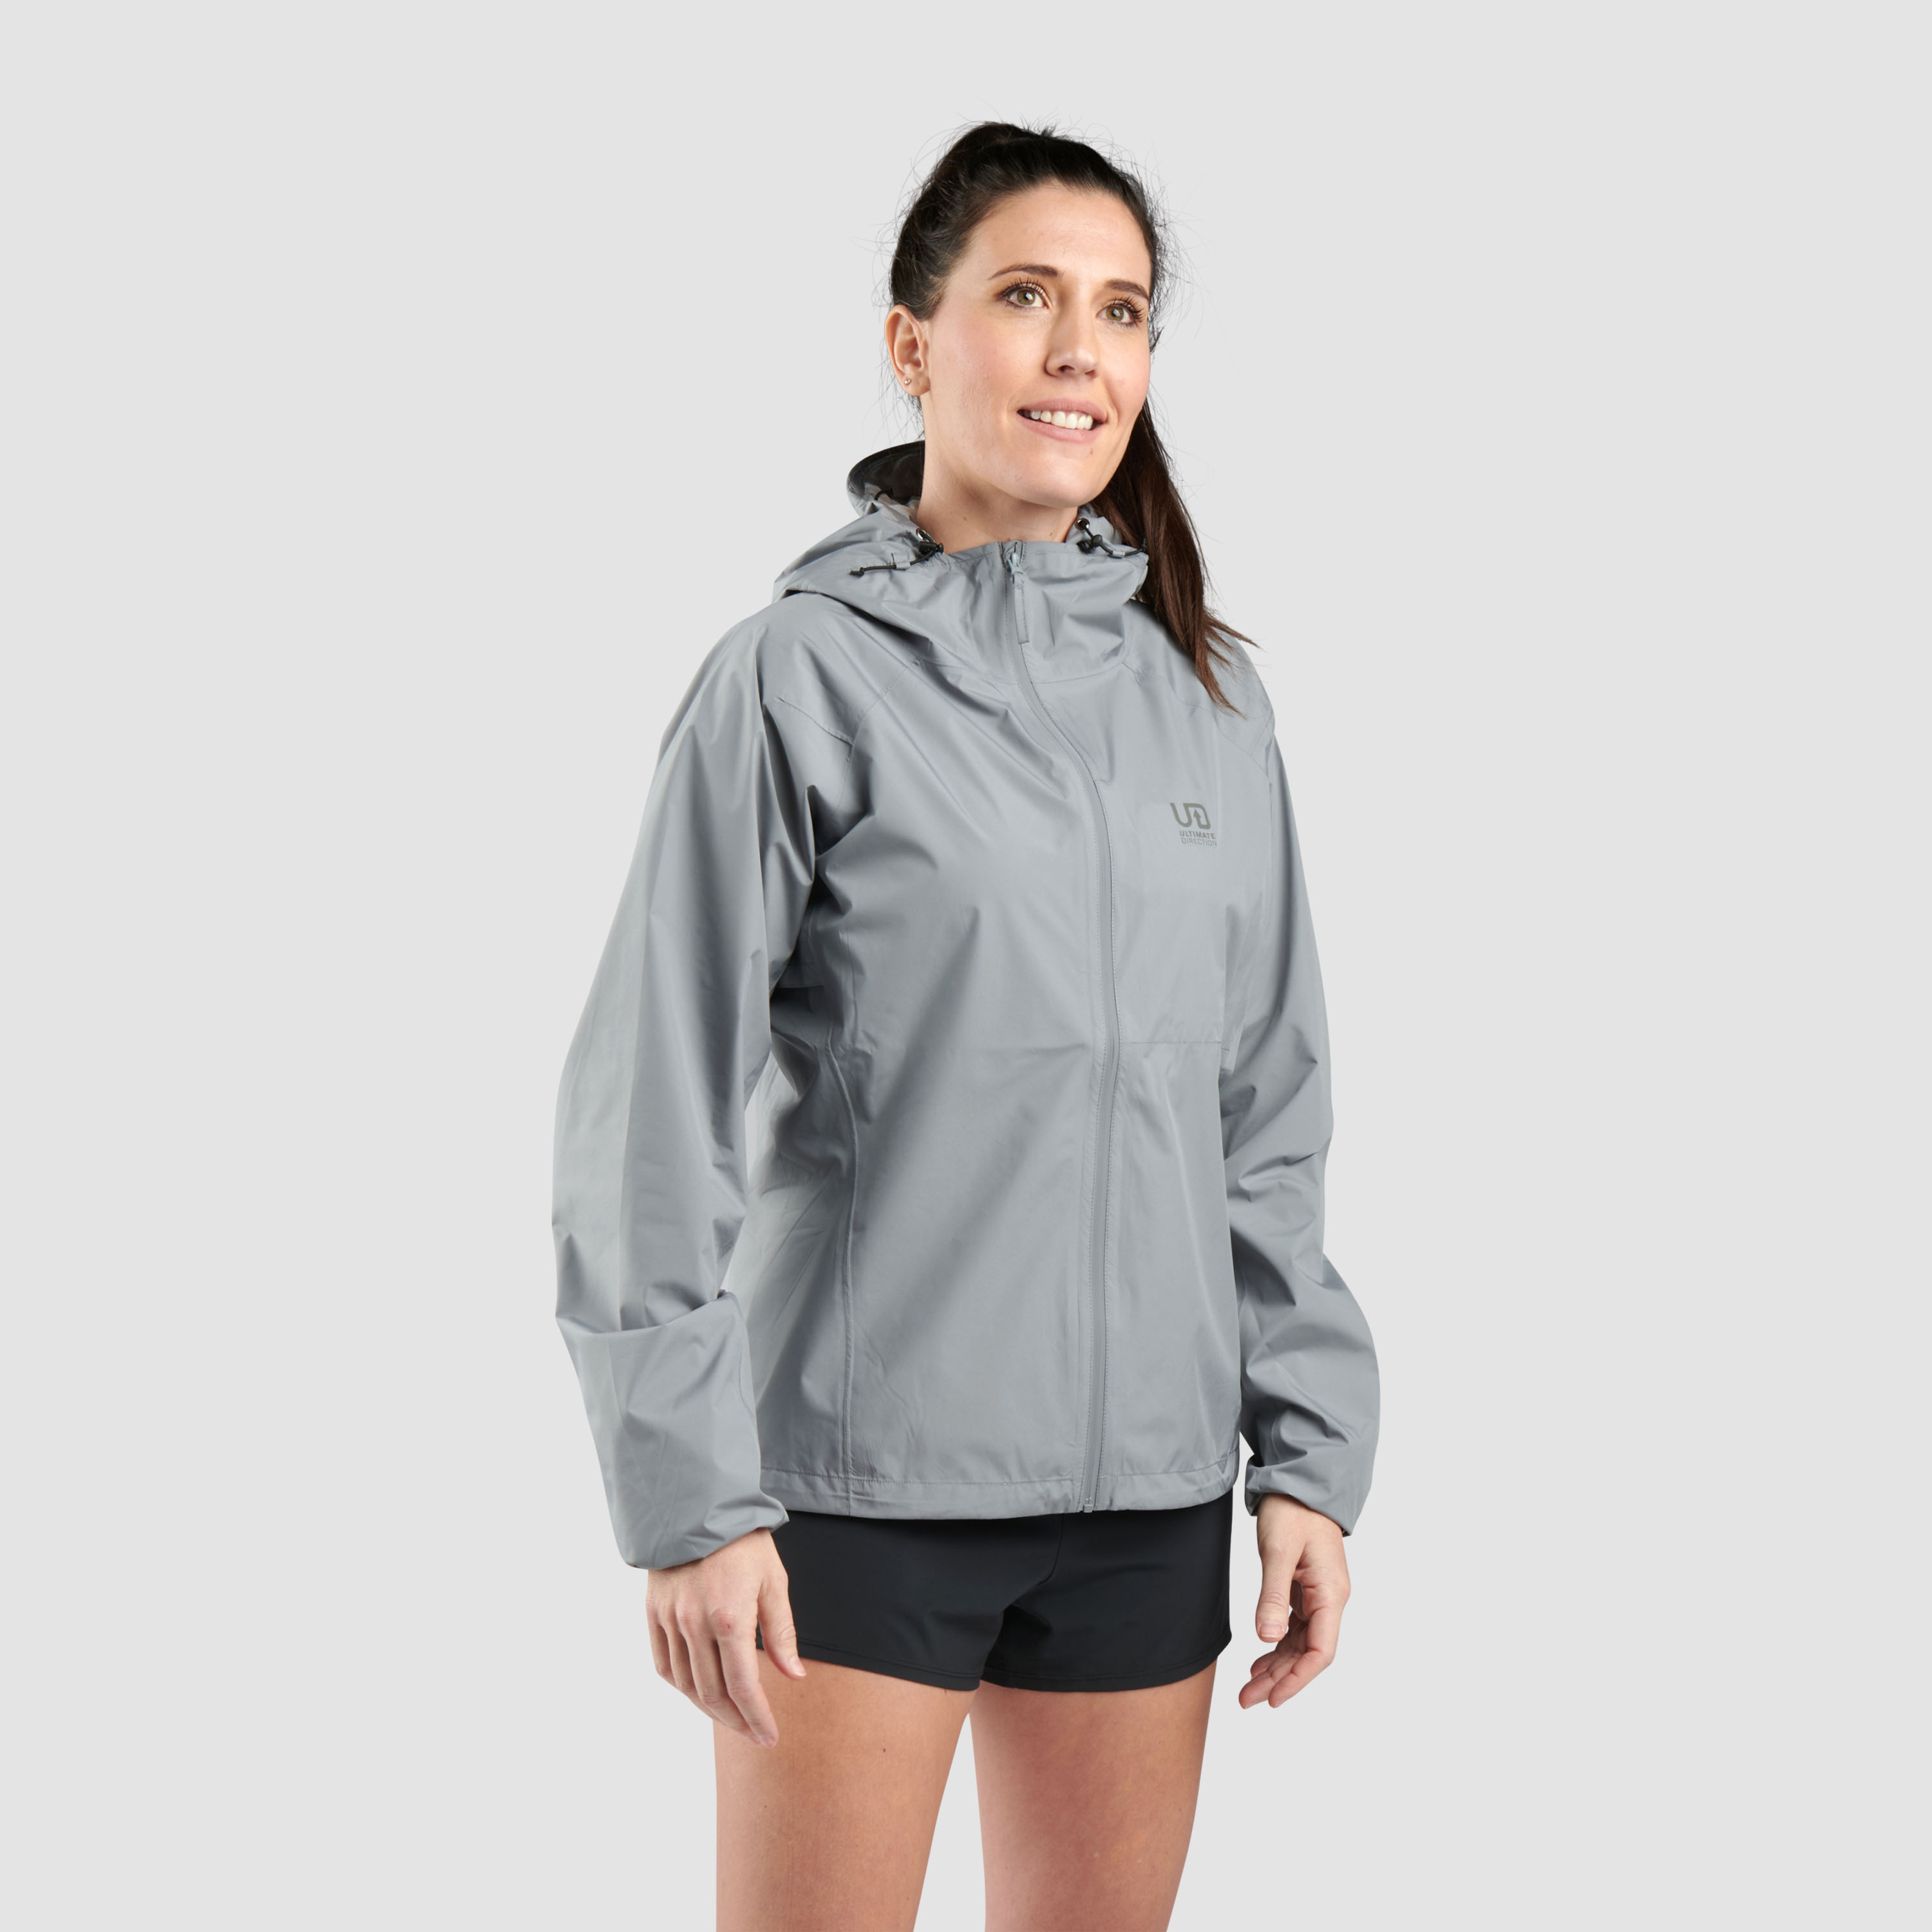 Ultimate Direction Women's Deluge Jacket in Gray Size Small